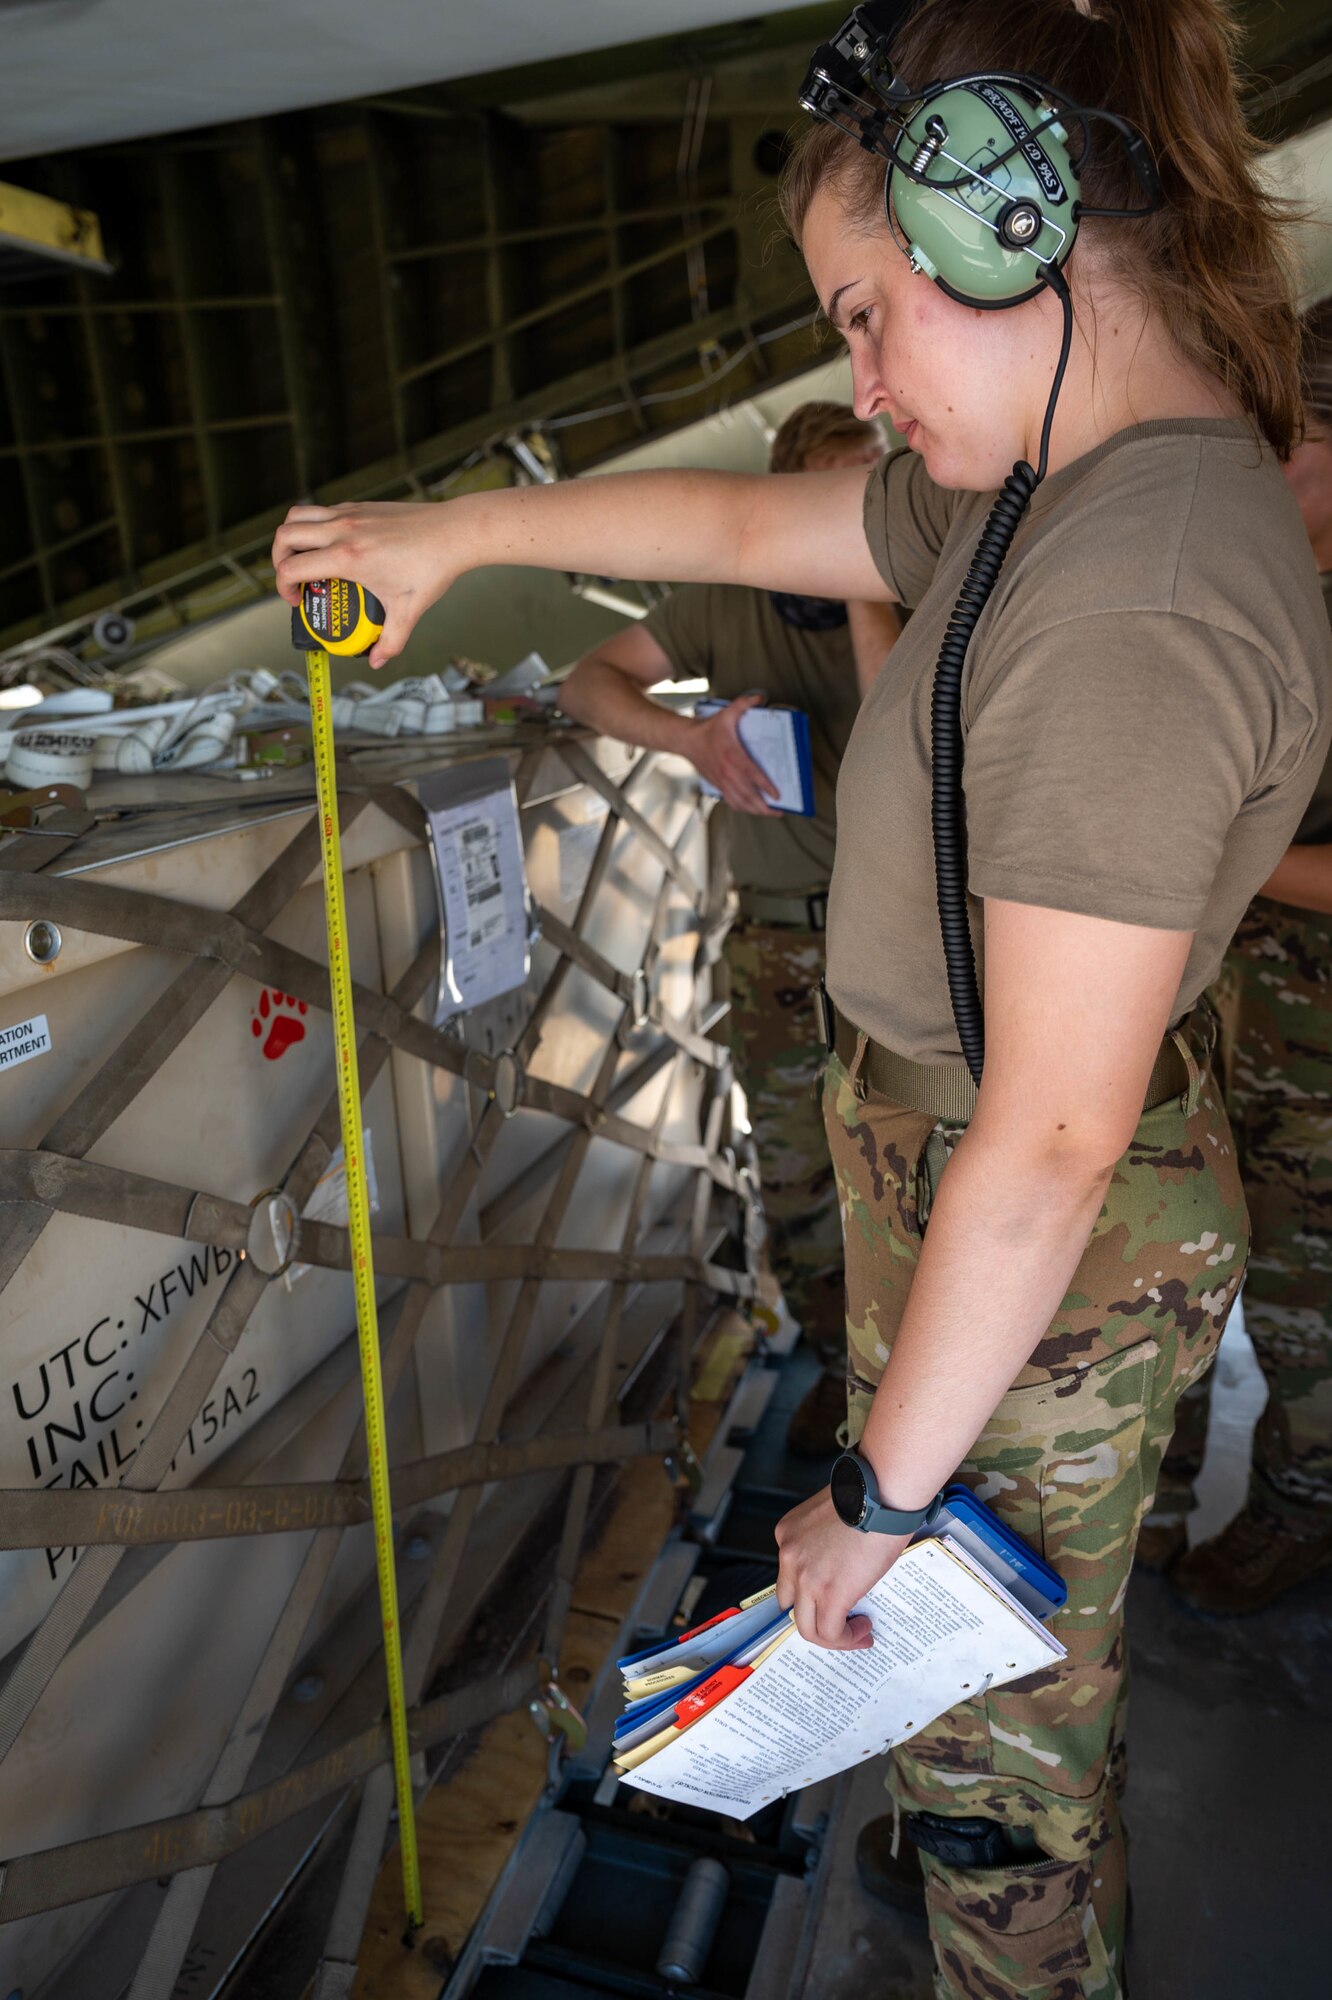 Senior Airman Amelia Bradfield, 9th Airlift Squadron loadmaster, measures the height of a cargo box before loading it onto a Dover Air Force Base C-5M Super Galaxy during a Major Command Service Tail Trainer exercise at Holloman AFB, New Mexico, June 2, 2021. The 9th AS performs MSTTs to expedite upgrade and qualification training for C-5M loadmasters and flight engineers. Over the course of the 10-day MSTT, 9th AS loadmasters loaded and unloaded 320,085 pounds of cargo, including palletized cargo, aircraft ground equipment, a fuel truck and a K-loader. (U.S. Air Force photo by Senior Airman Faith Schaefer)